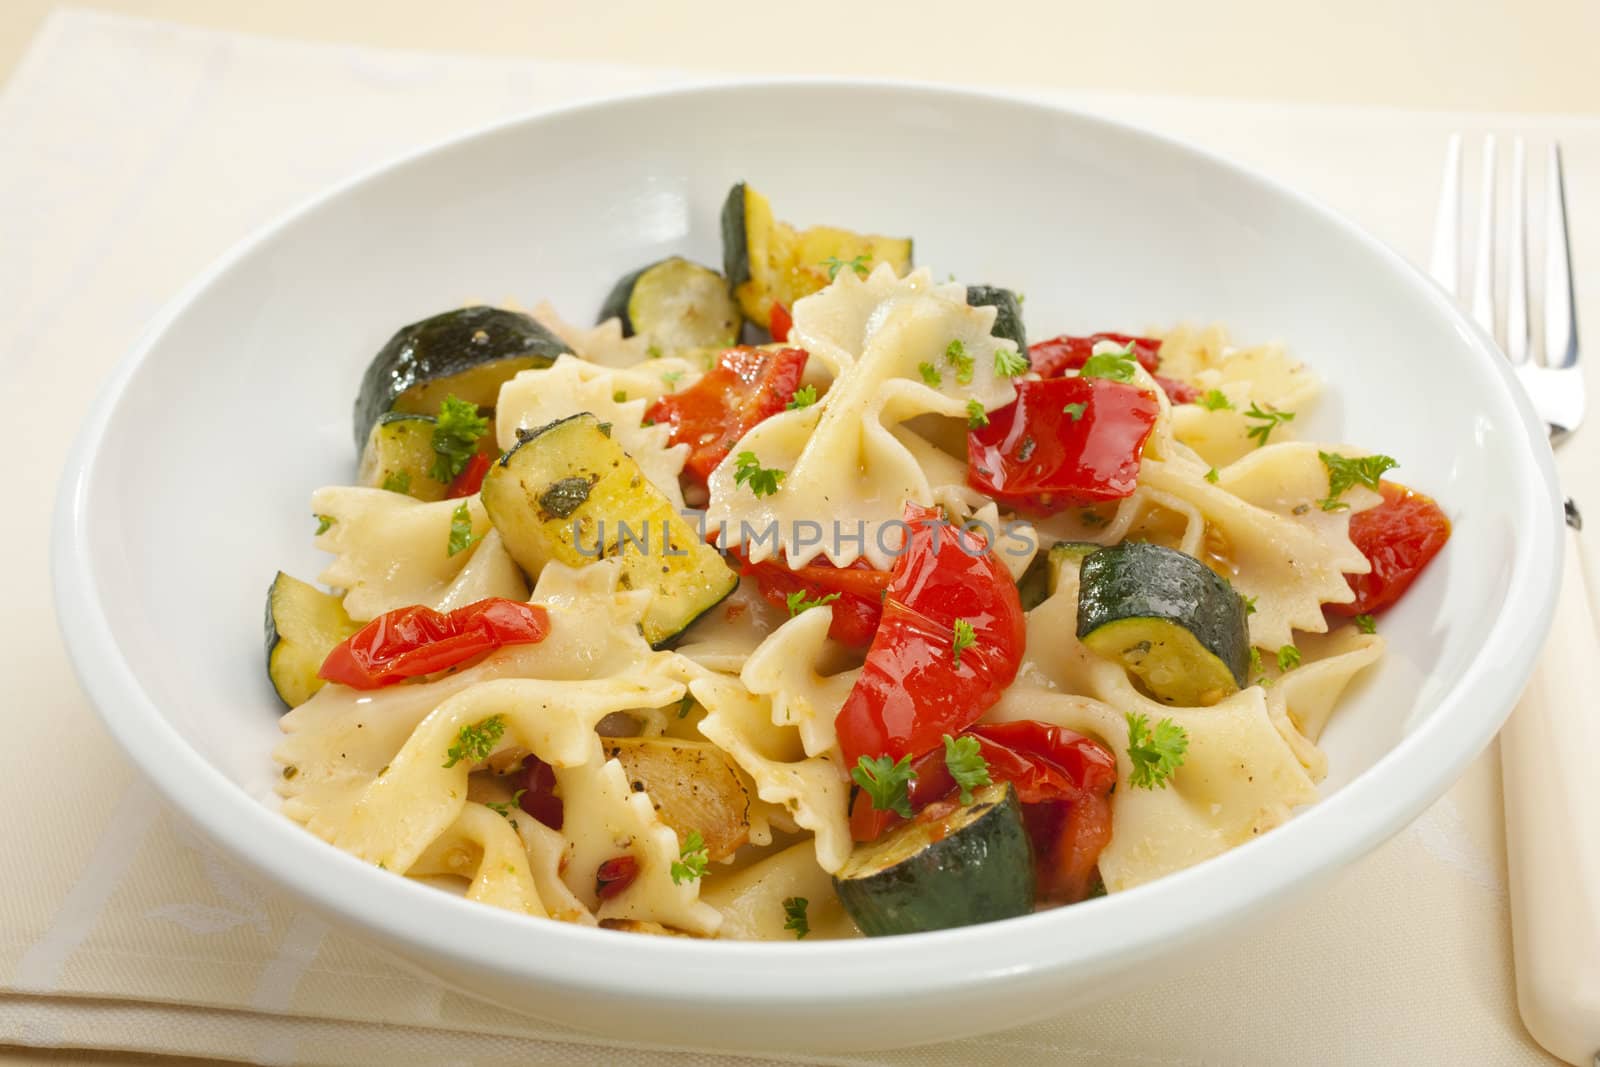 Farfalle Pasta with Roast Vegetables by Travelling-light